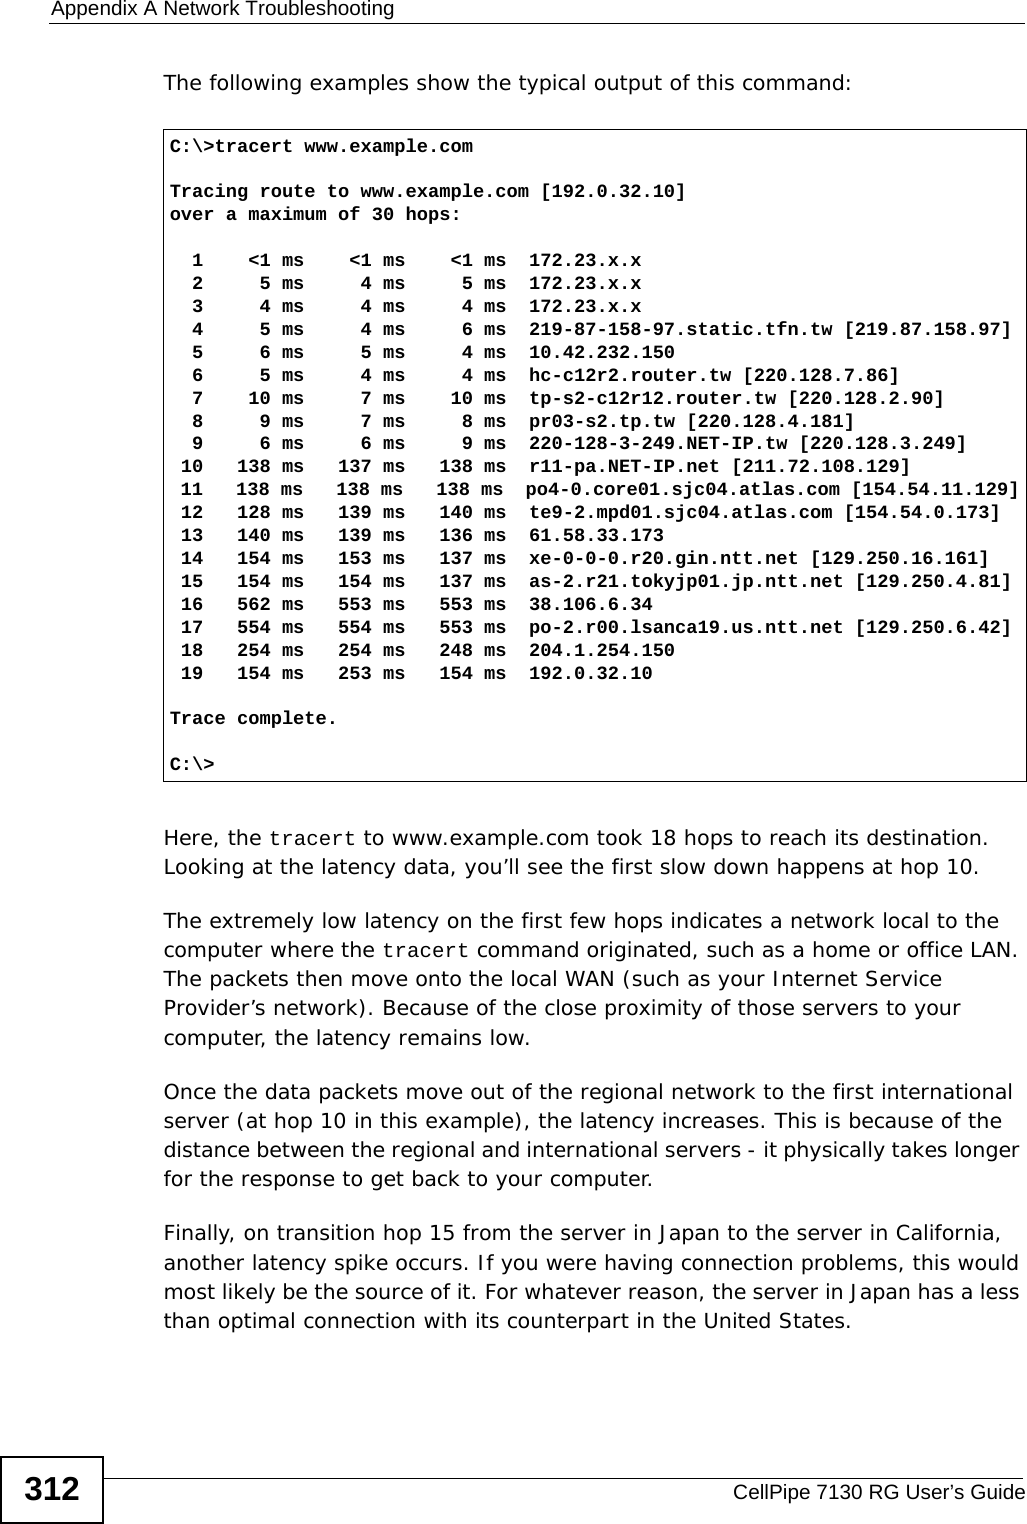 Appendix A Network TroubleshootingCellPipe 7130 RG User’s Guide312The following examples show the typical output of this command: Here, the tracert to www.example.com took 18 hops to reach its destination. Looking at the latency data, you’ll see the first slow down happens at hop 10. The extremely low latency on the first few hops indicates a network local to the computer where the tracert command originated, such as a home or office LAN. The packets then move onto the local WAN (such as your Internet Service Provider’s network). Because of the close proximity of those servers to your computer, the latency remains low.Once the data packets move out of the regional network to the first international server (at hop 10 in this example), the latency increases. This is because of the distance between the regional and international servers - it physically takes longer for the response to get back to your computer.Finally, on transition hop 15 from the server in Japan to the server in California, another latency spike occurs. If you were having connection problems, this would most likely be the source of it. For whatever reason, the server in Japan has a less than optimal connection with its counterpart in the United States.C:\&gt;tracert www.example.comTracing route to www.example.com [192.0.32.10]over a maximum of 30 hops:  1    &lt;1 ms    &lt;1 ms    &lt;1 ms  172.23.x.x  2     5 ms     4 ms     5 ms  172.23.x.x  3     4 ms     4 ms     4 ms  172.23.x.x  4     5 ms     4 ms     6 ms  219-87-158-97.static.tfn.tw [219.87.158.97]  5     6 ms     5 ms     4 ms  10.42.232.150  6     5 ms     4 ms     4 ms  hc-c12r2.router.tw [220.128.7.86]  7    10 ms     7 ms    10 ms  tp-s2-c12r12.router.tw [220.128.2.90]  8     9 ms     7 ms     8 ms  pr03-s2.tp.tw [220.128.4.181]  9     6 ms     6 ms     9 ms  220-128-3-249.NET-IP.tw [220.128.3.249] 10   138 ms   137 ms   138 ms  r11-pa.NET-IP.net [211.72.108.129] 11   138 ms   138 ms   138 ms  po4-0.core01.sjc04.atlas.com [154.54.11.129] 12   128 ms   139 ms   140 ms  te9-2.mpd01.sjc04.atlas.com [154.54.0.173] 13   140 ms   139 ms   136 ms  61.58.33.173 14   154 ms   153 ms   137 ms  xe-0-0-0.r20.gin.ntt.net [129.250.16.161] 15   154 ms   154 ms   137 ms  as-2.r21.tokyjp01.jp.ntt.net [129.250.4.81] 16   562 ms   553 ms   553 ms  38.106.6.34 17   554 ms   554 ms   553 ms  po-2.r00.lsanca19.us.ntt.net [129.250.6.42] 18   254 ms   254 ms   248 ms  204.1.254.150 19   154 ms   253 ms   154 ms  192.0.32.10Trace complete.C:\&gt;